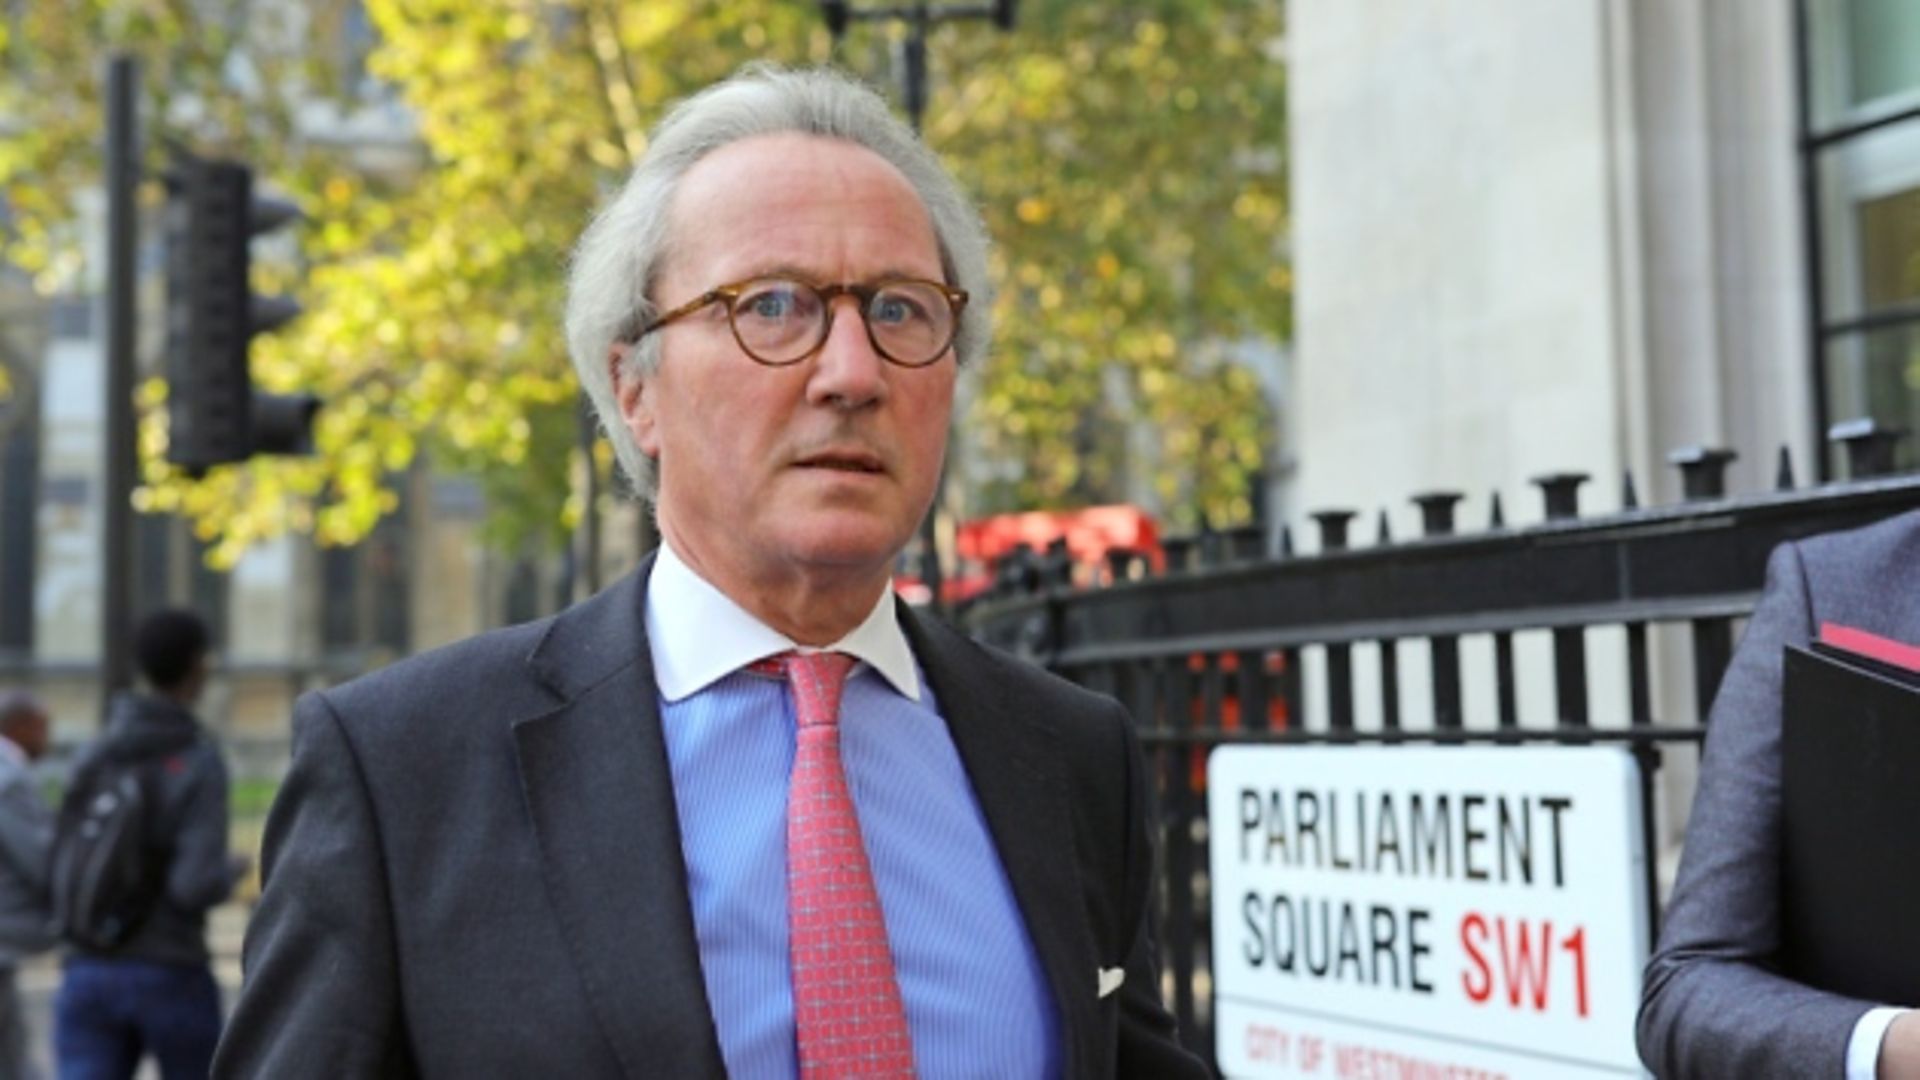 Advocate General for Scotland, Lord Keen QC, arrives at the Supreme Court. Photograph: Aaron Chown/PA.